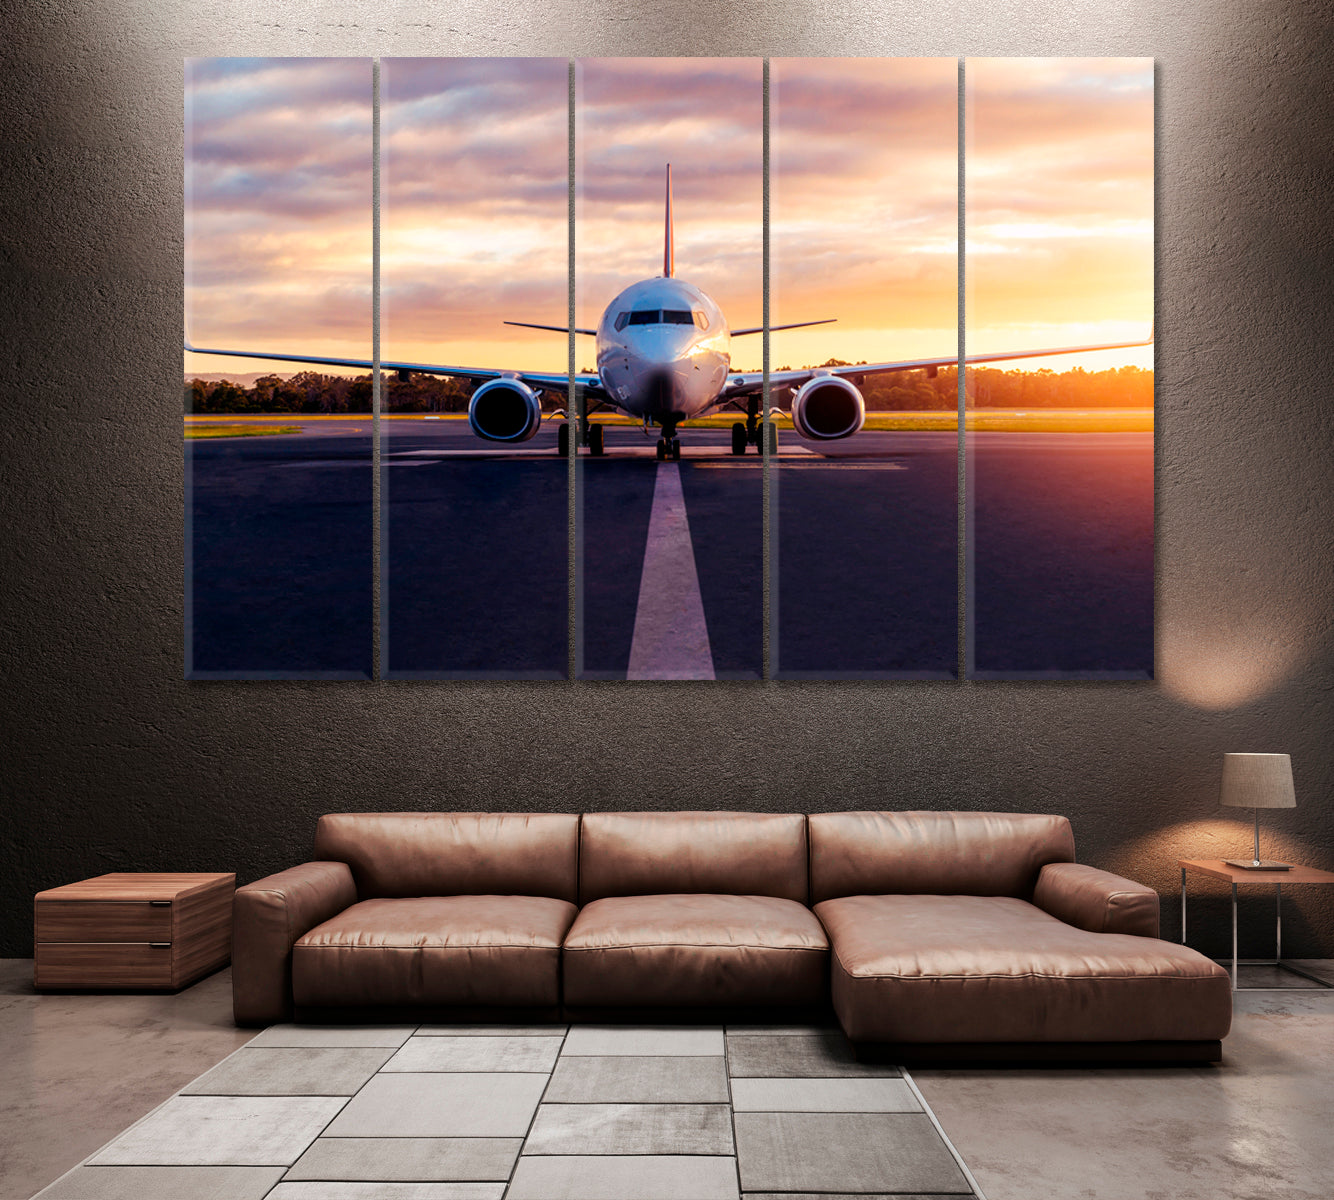 Airplane on Runway Canvas Print ArtLexy 5 Panels 36"x24" inches 